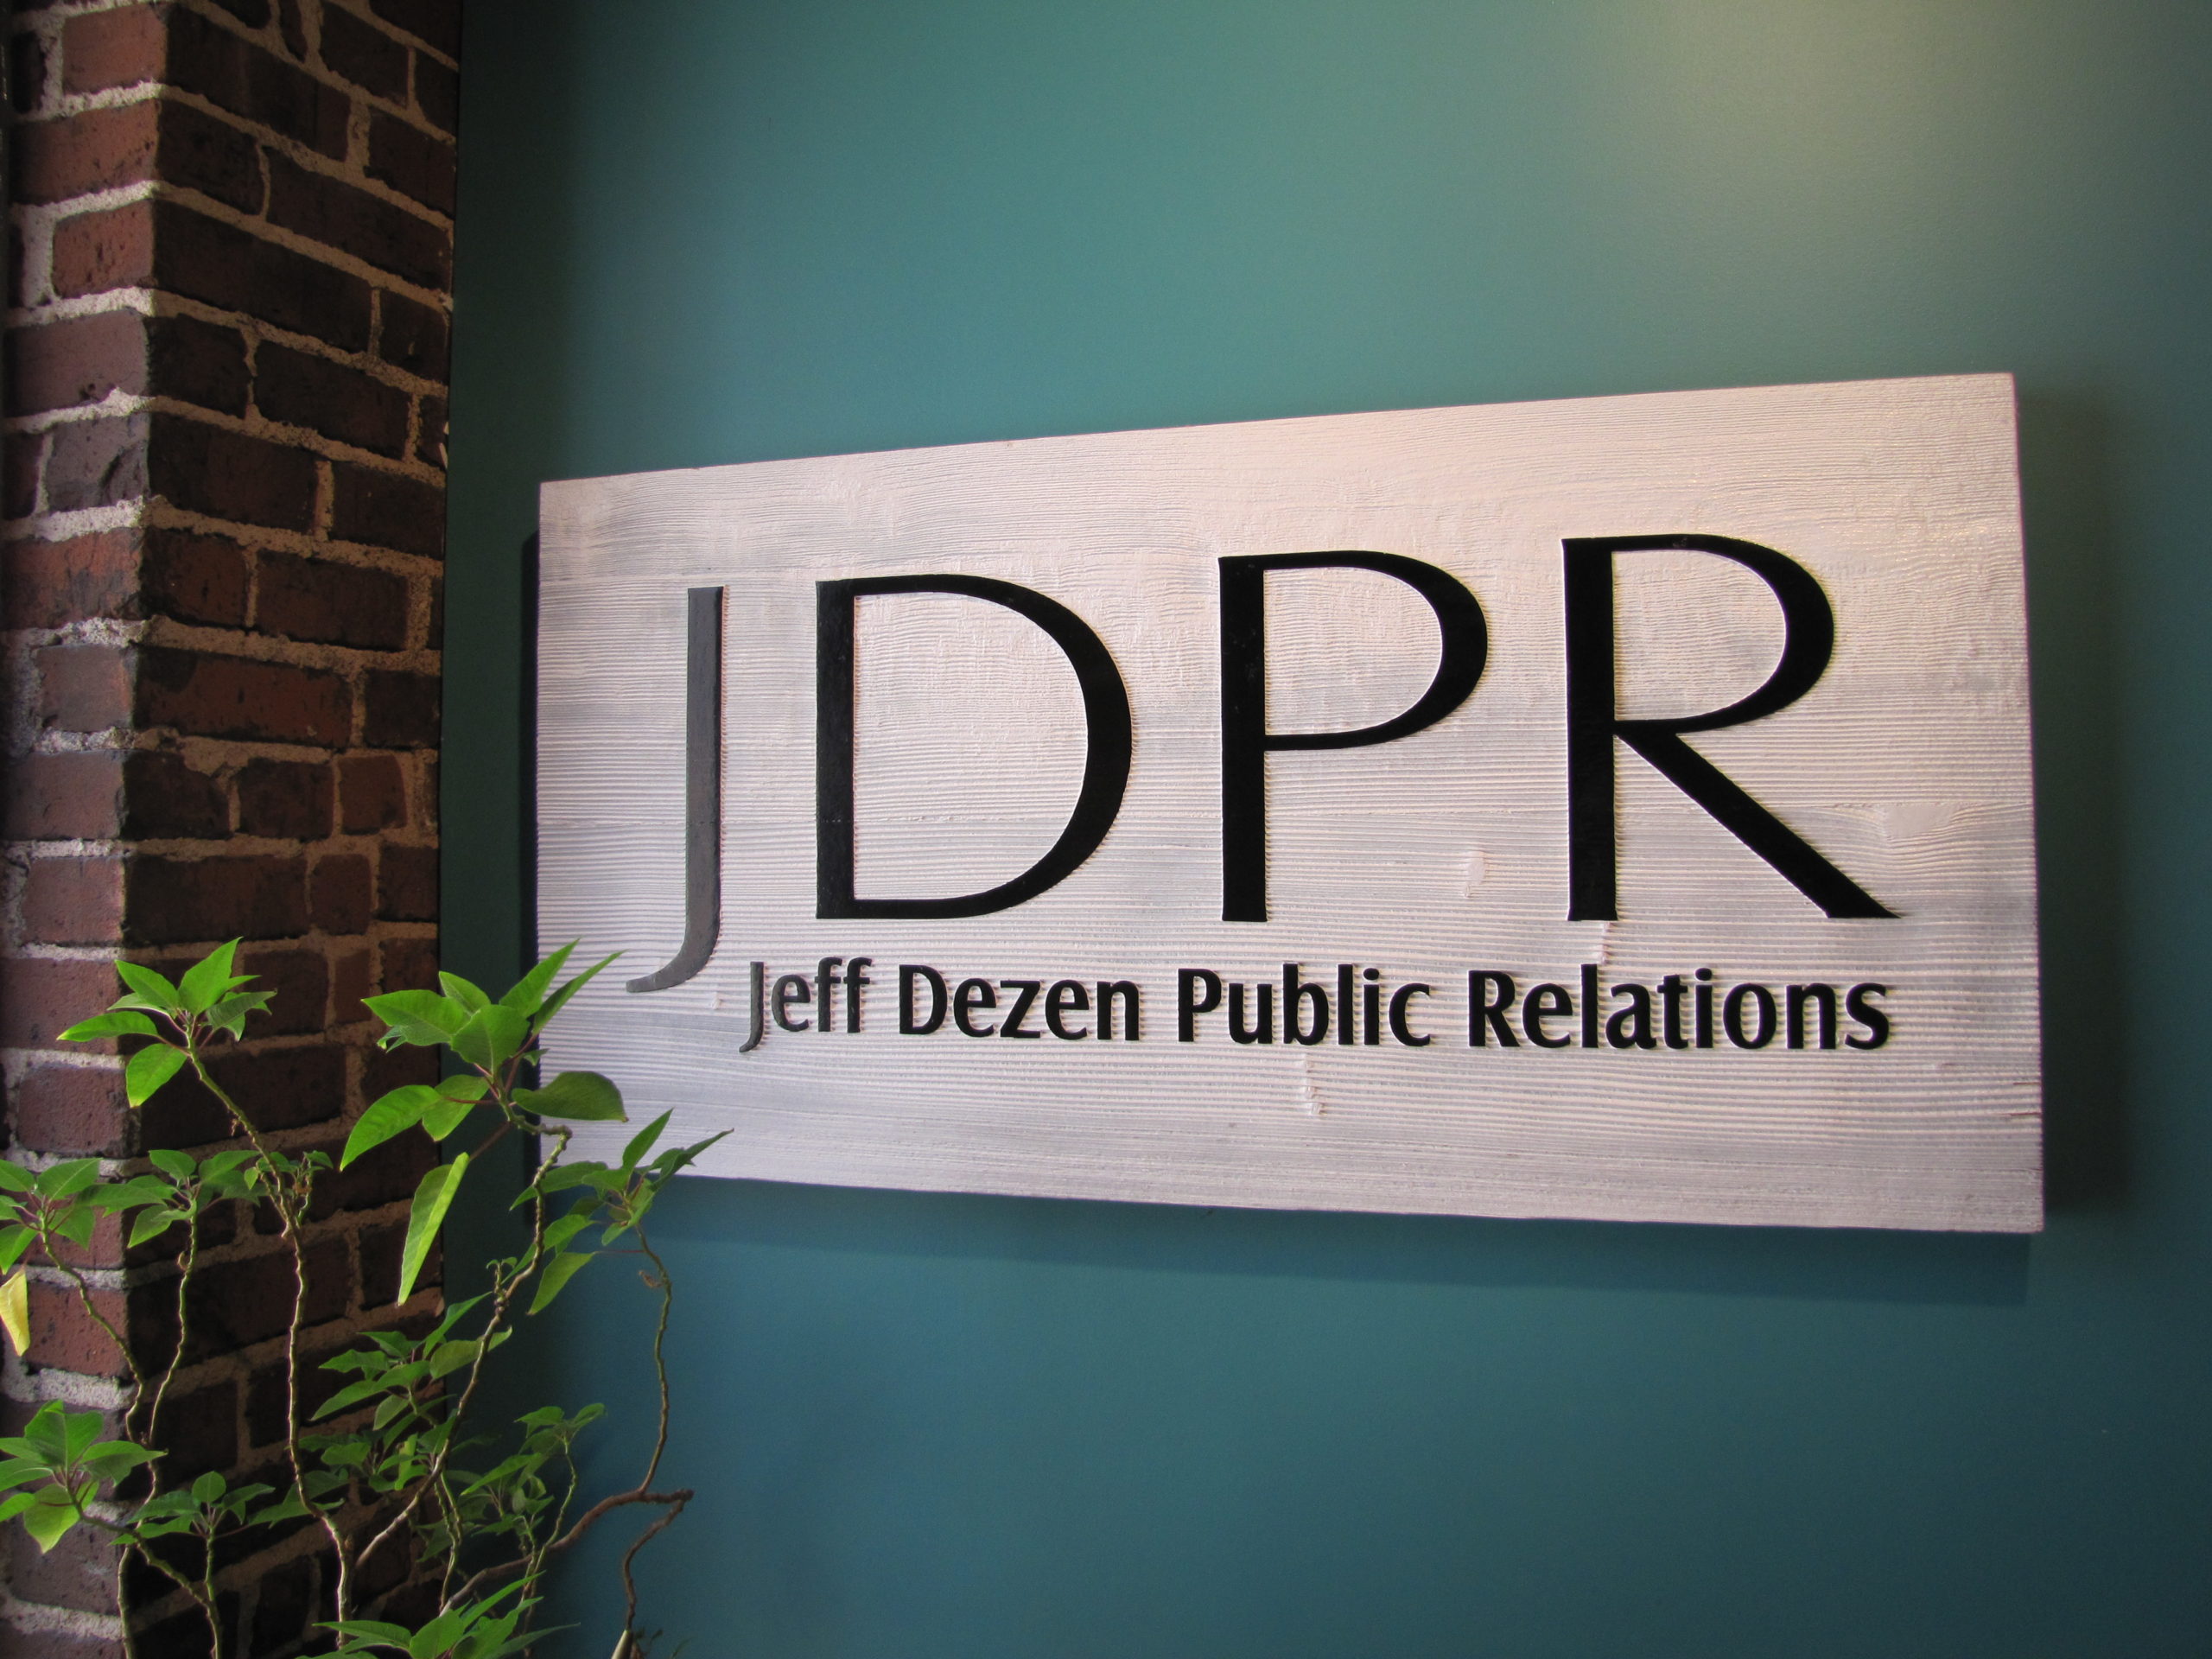 Jeff Dezen Public Relations (JDPR) celebrates 30 years as leading corporate communications agency, focuses on future growth